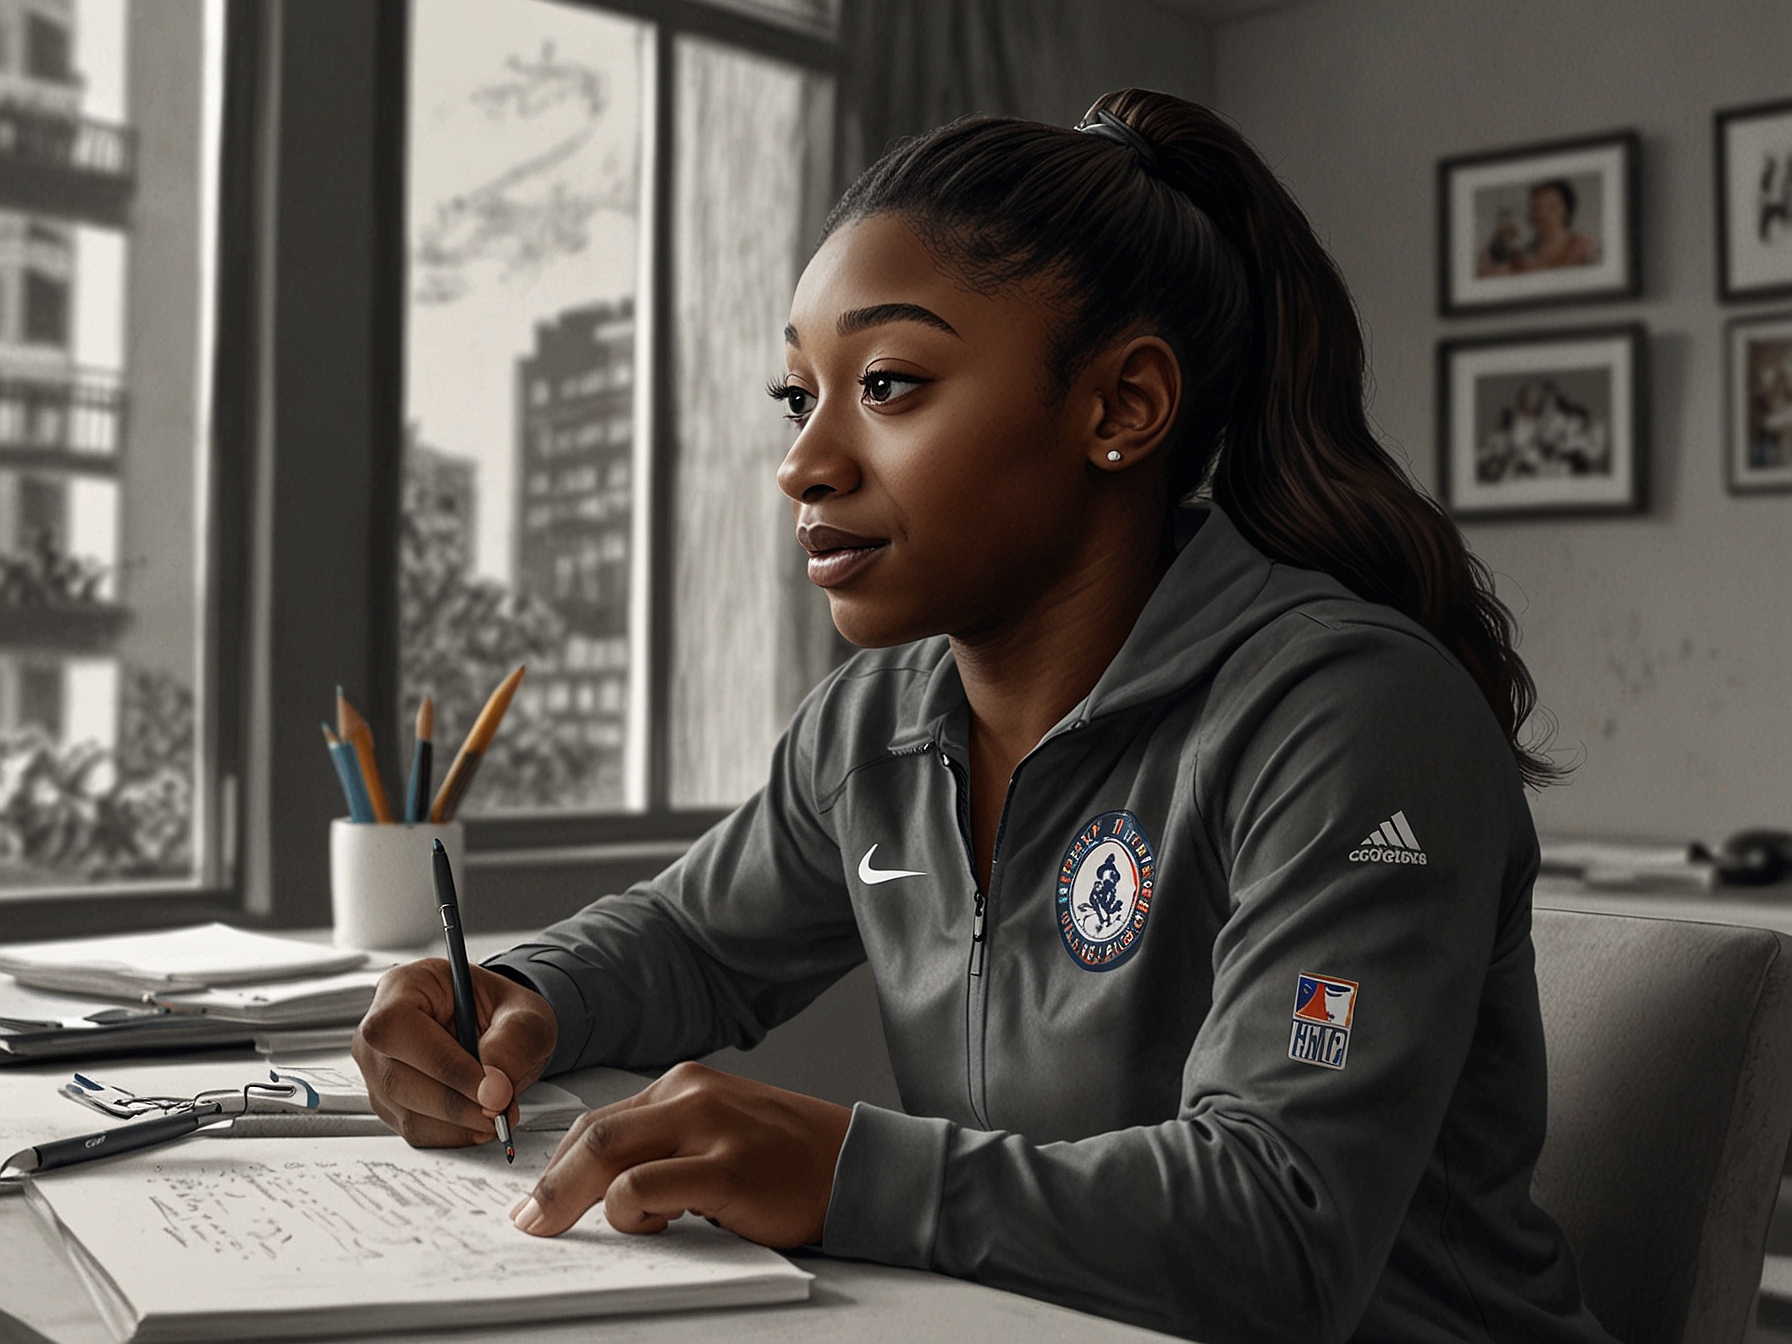 A candid moment with Simone Biles in an interview setting, capturing her raw emotions and thoughts on the challenges faced during and after the 2020 Tokyo Olympics.